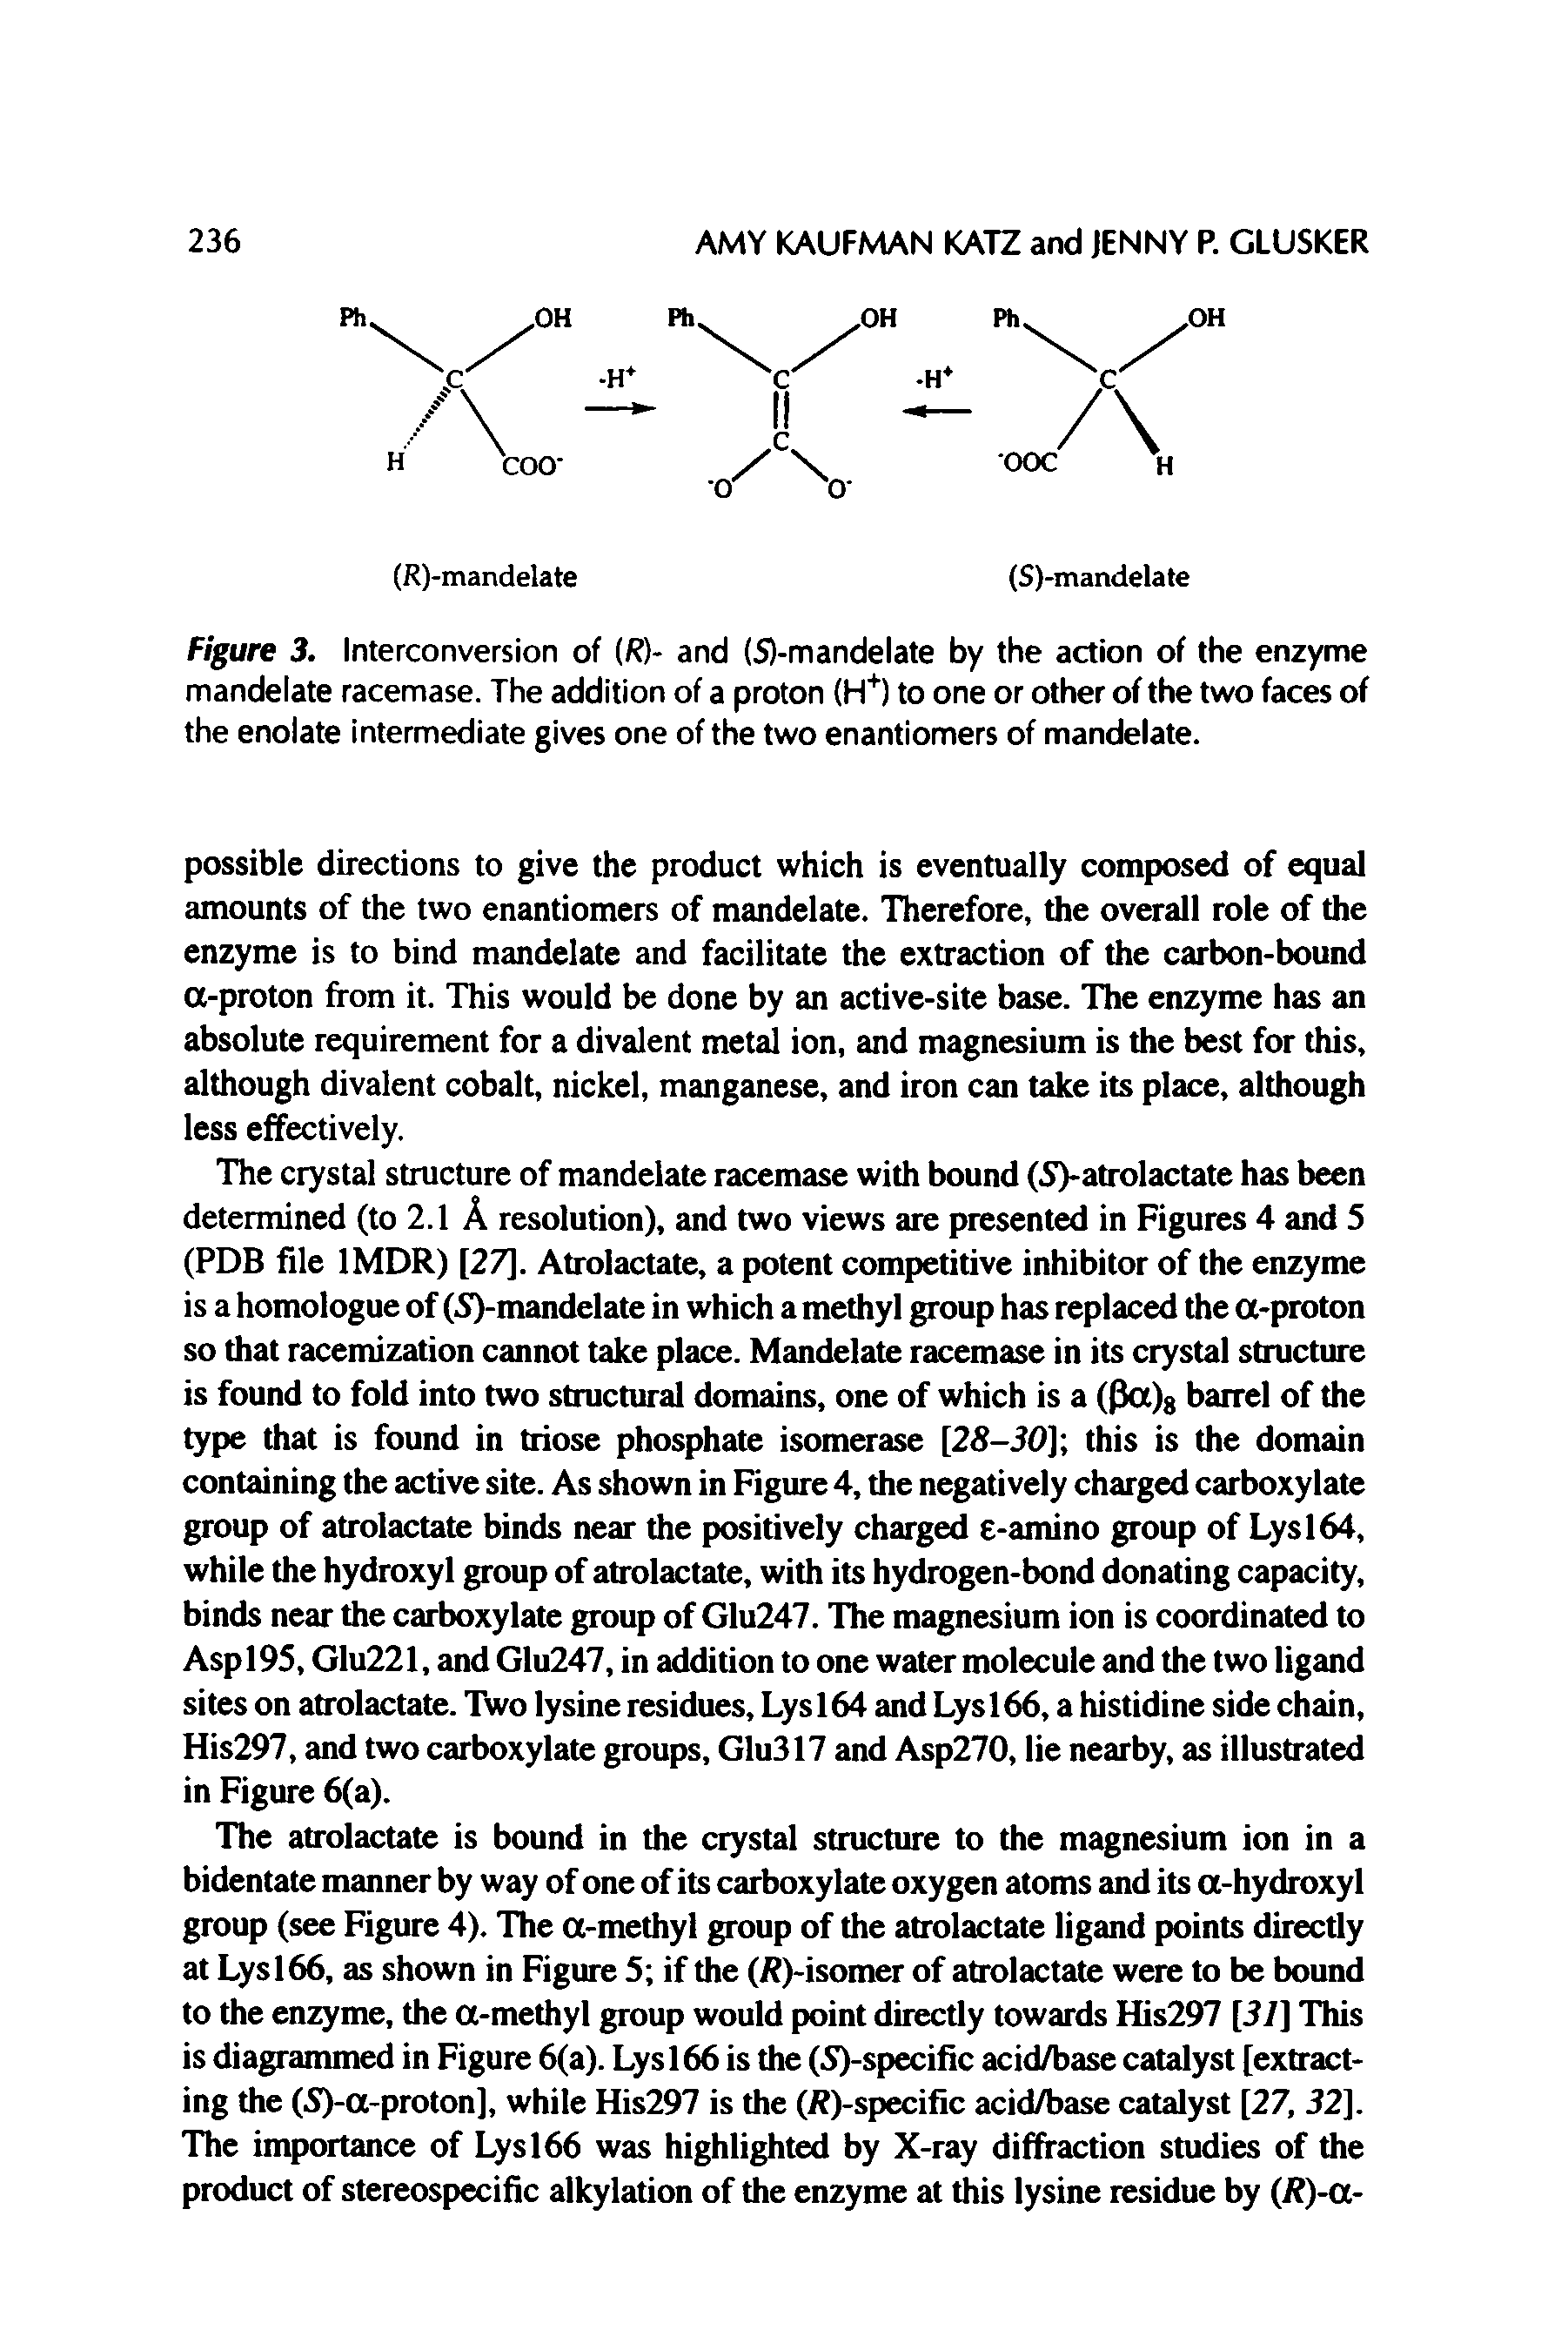 Figure 3. Interconversion of (/ )- and (S)-mandelate by the action of the enzyme mandelate racemase. The addition of a proton to one or other of the two faces of...